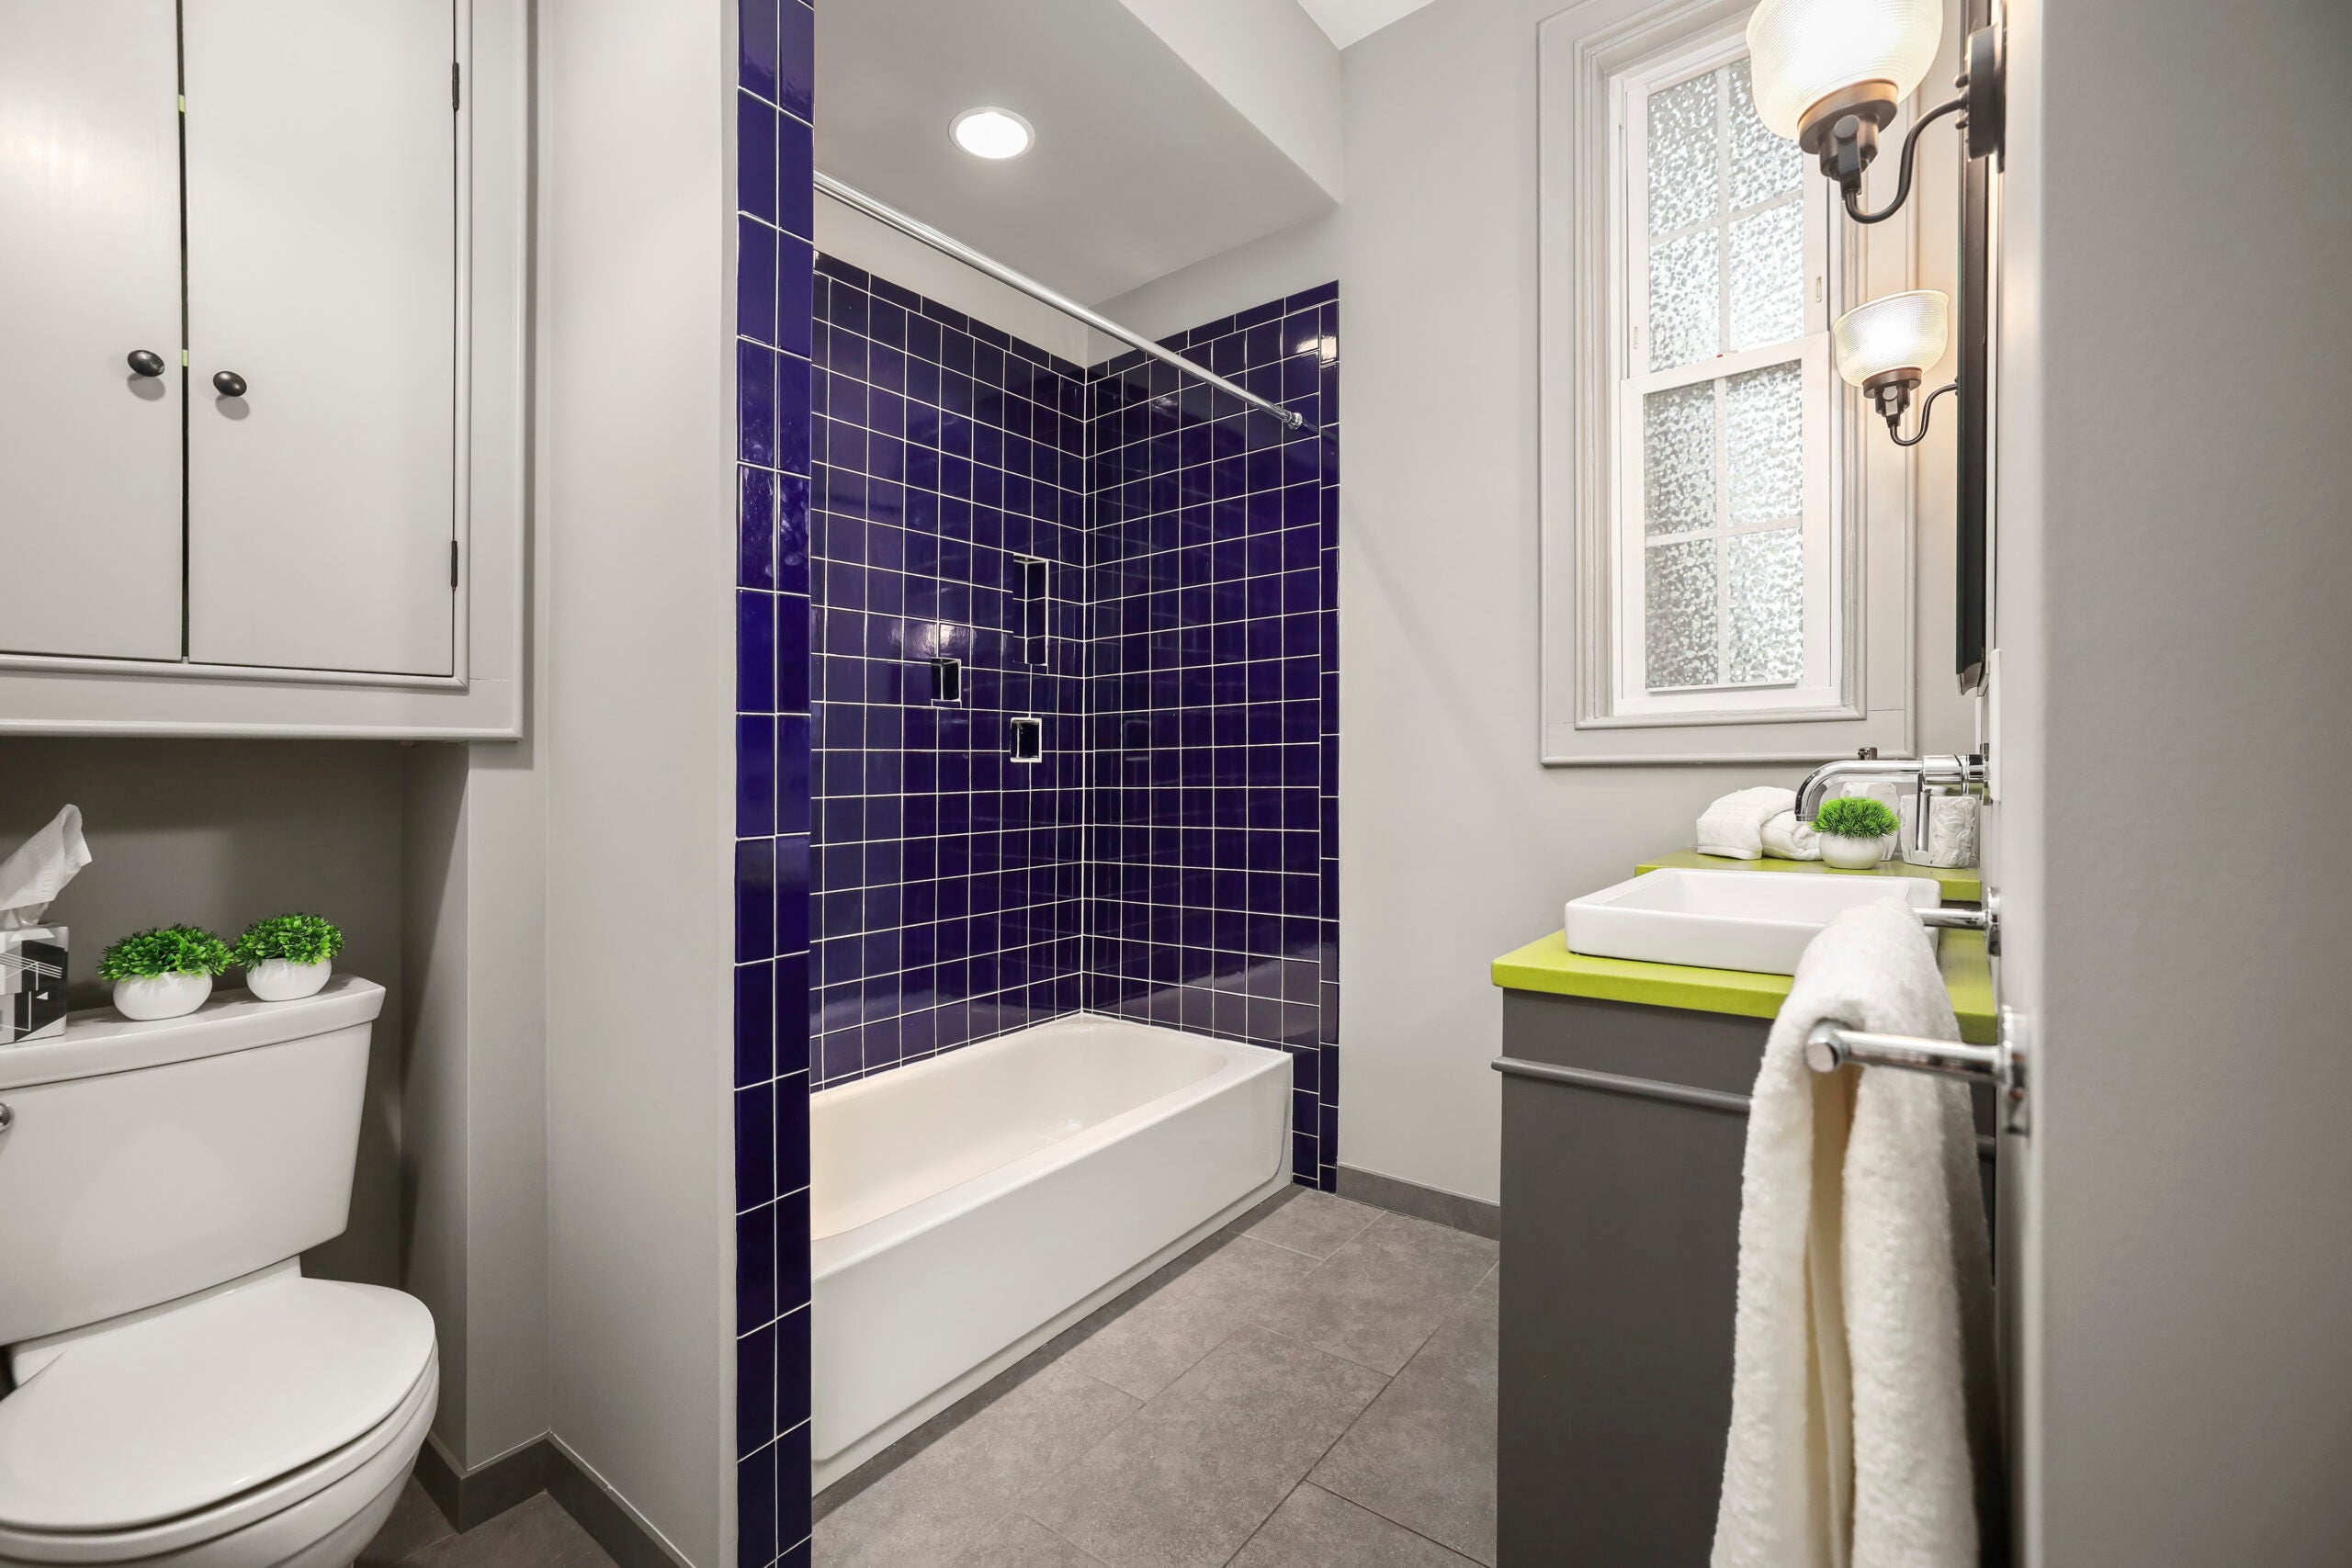 The bathroom has a combination shower-bathtub with navy blue tiling and a single-hung window.